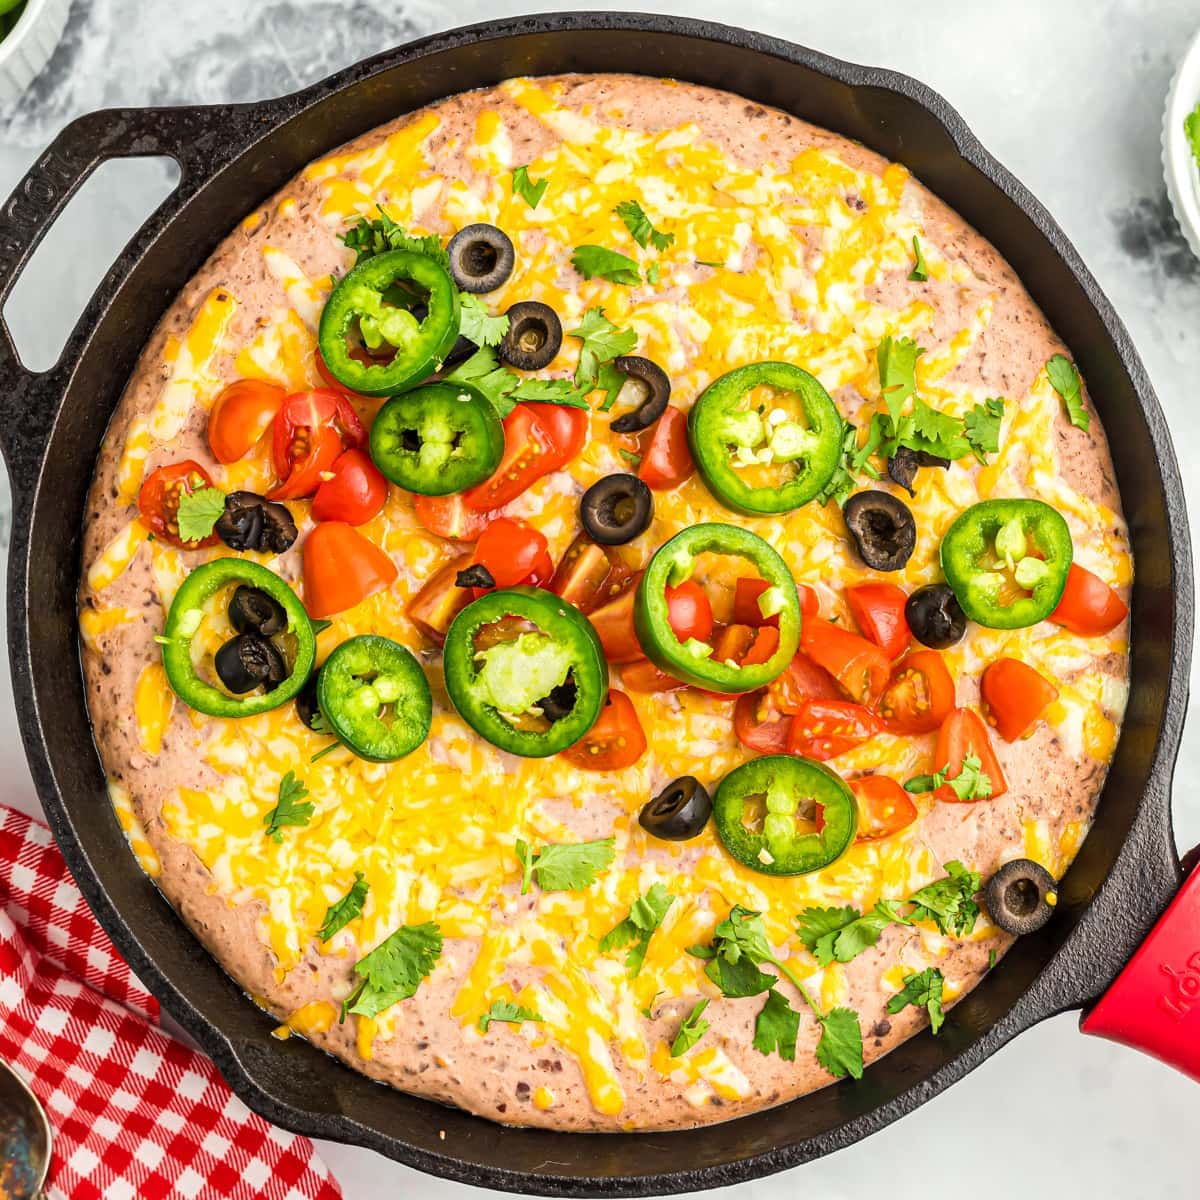 Black bean dip served in a cast iron skillet.